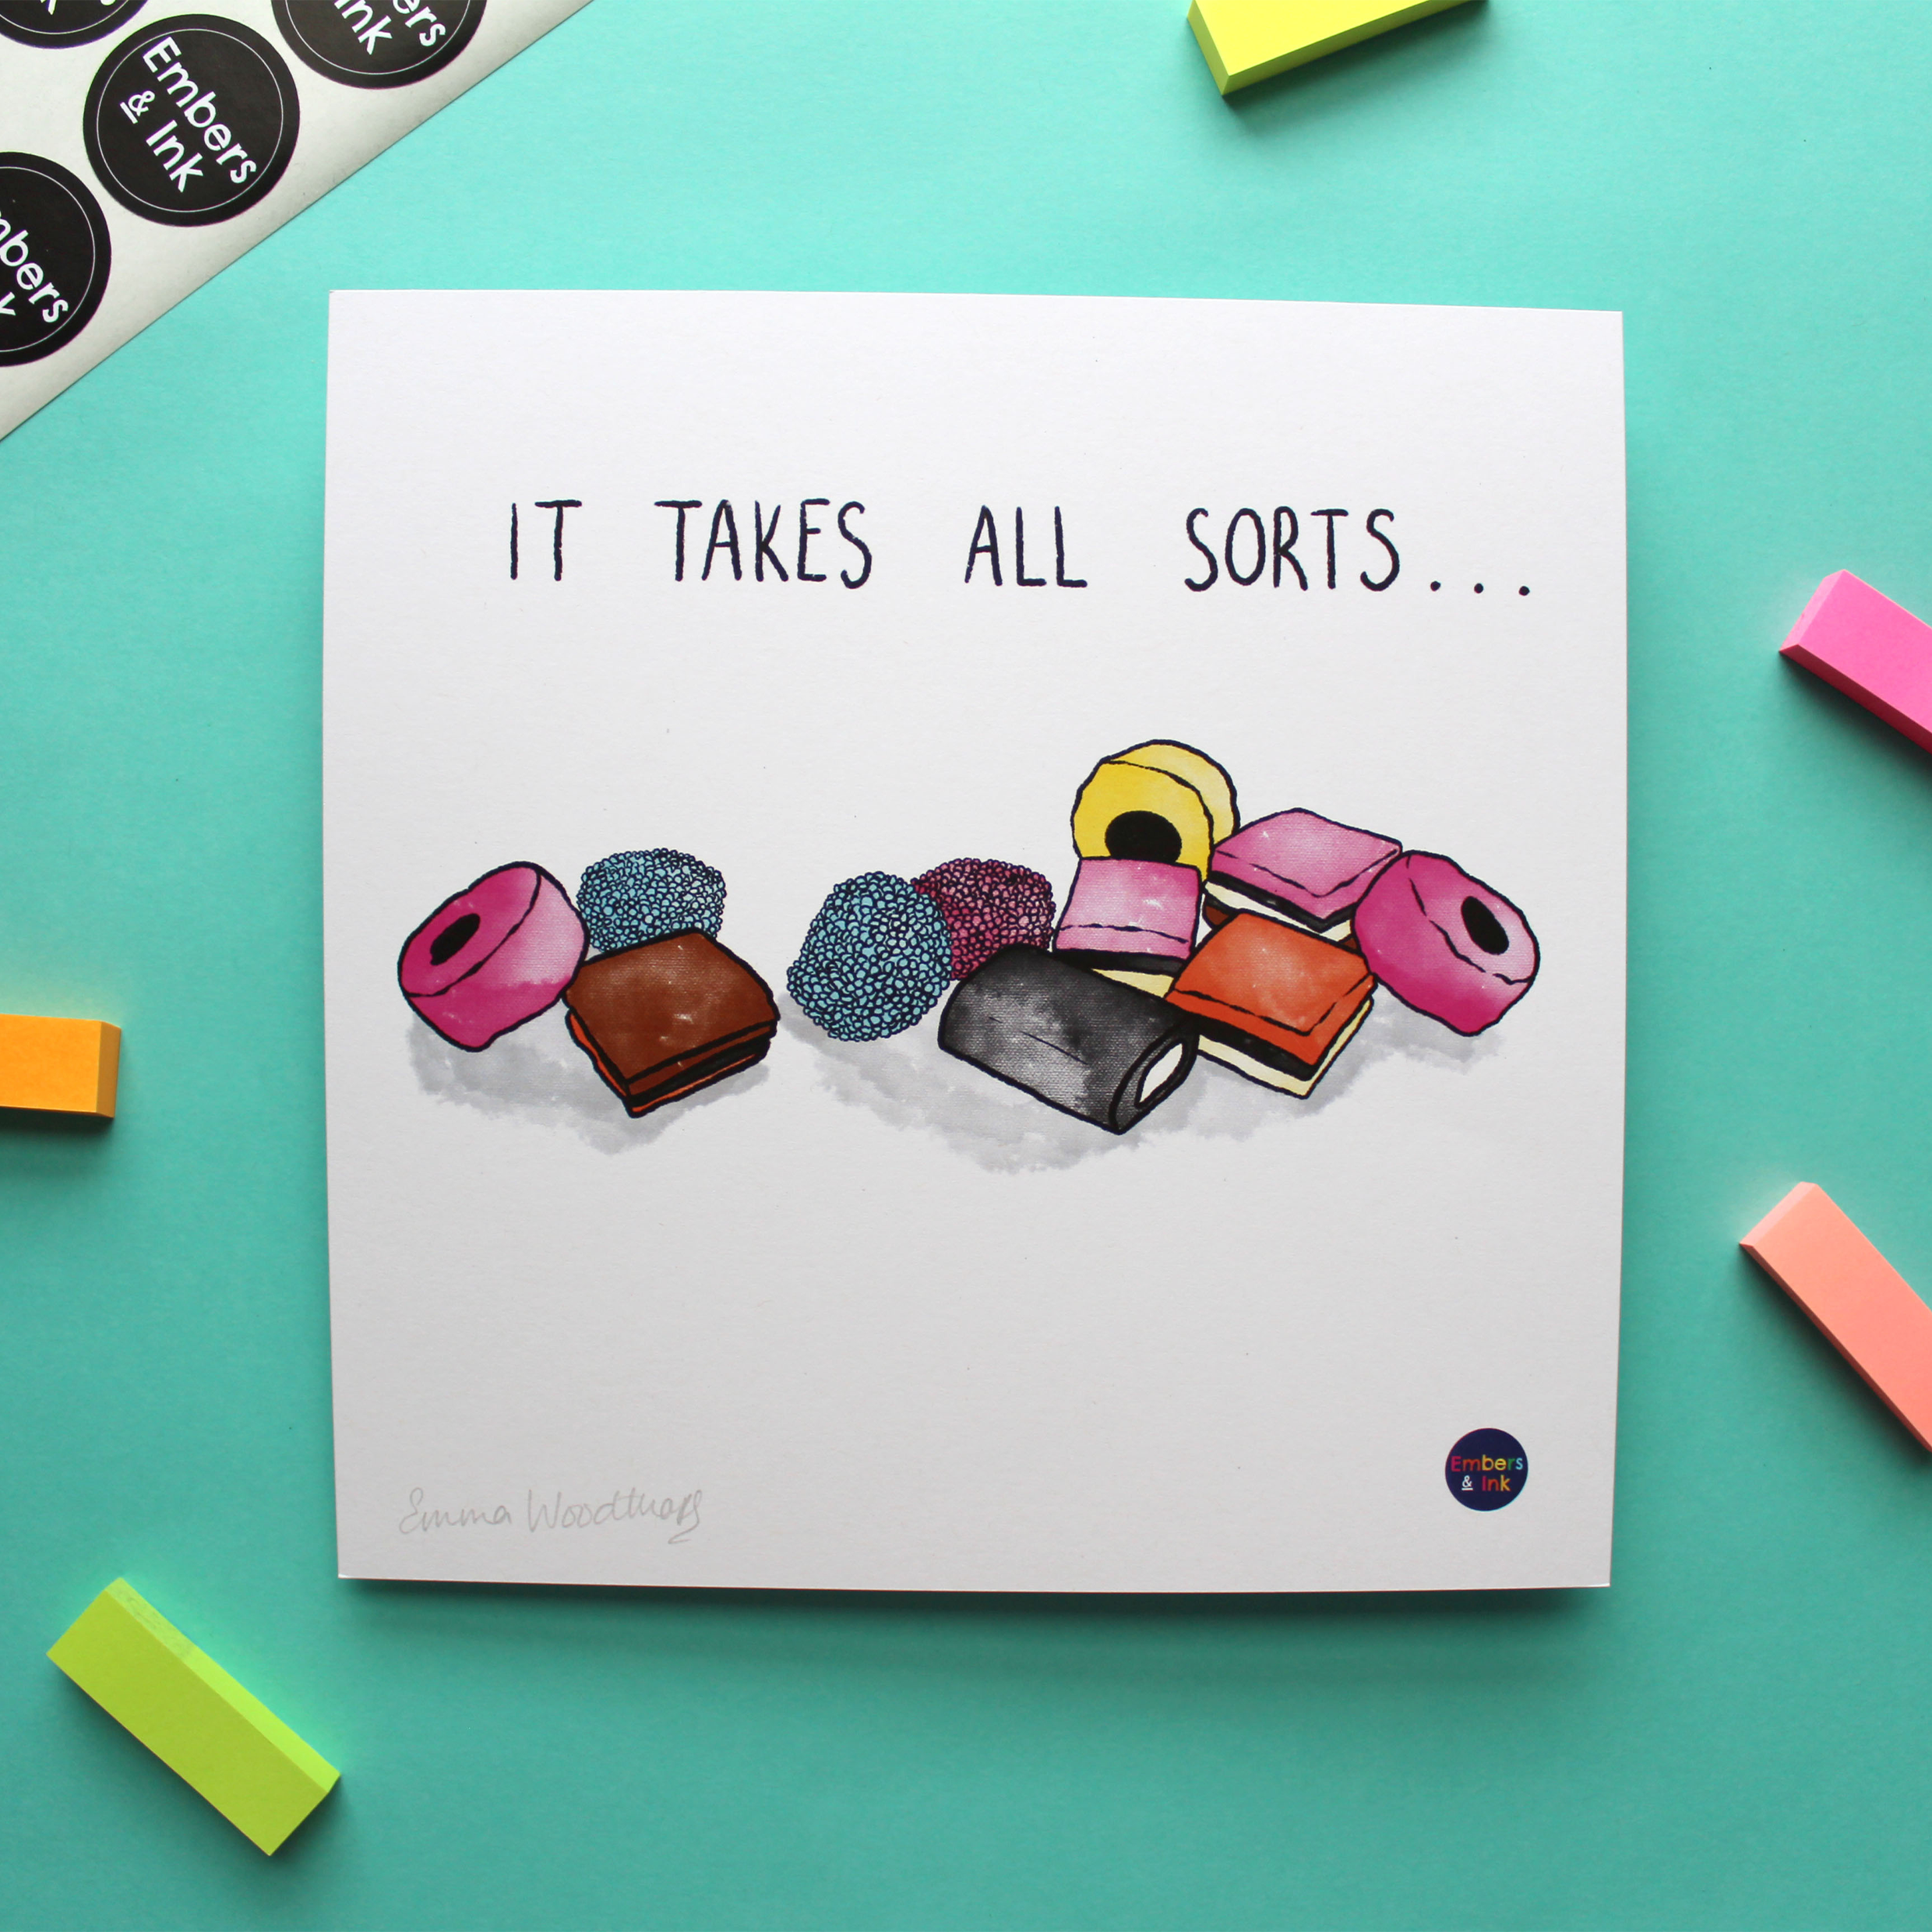 A square art print with an illustration of a pile of All Sorts sweets is shown. On the print, above the illustration, are the words 'it takes all sorts'